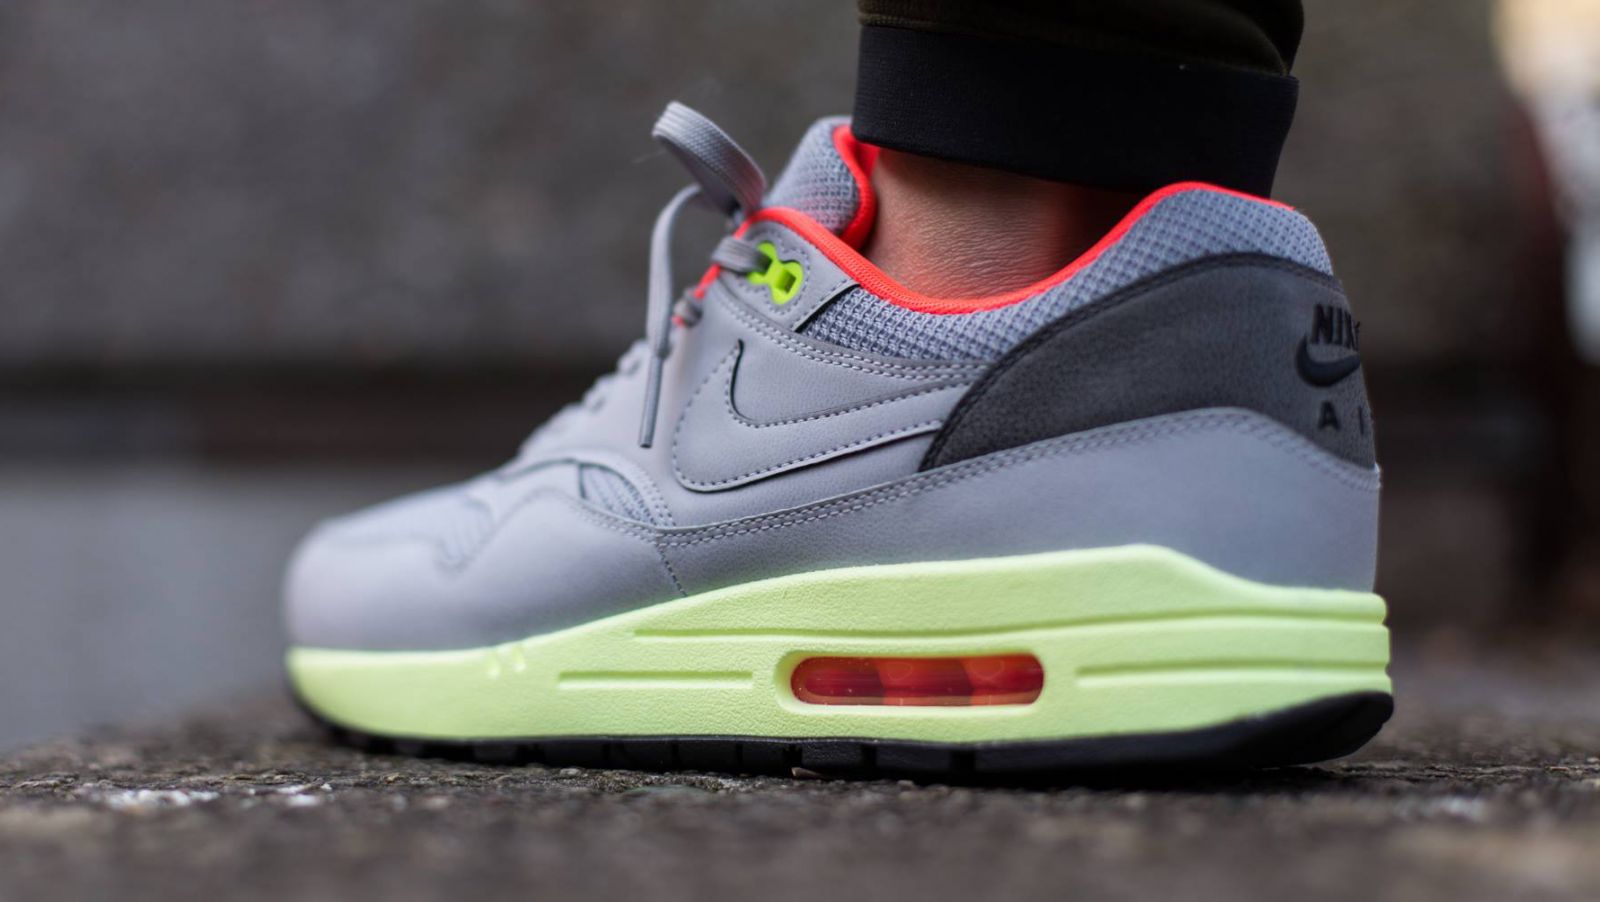 Nike Air Max 1 Hyperfuse Wolf Grey Black Green Shoes